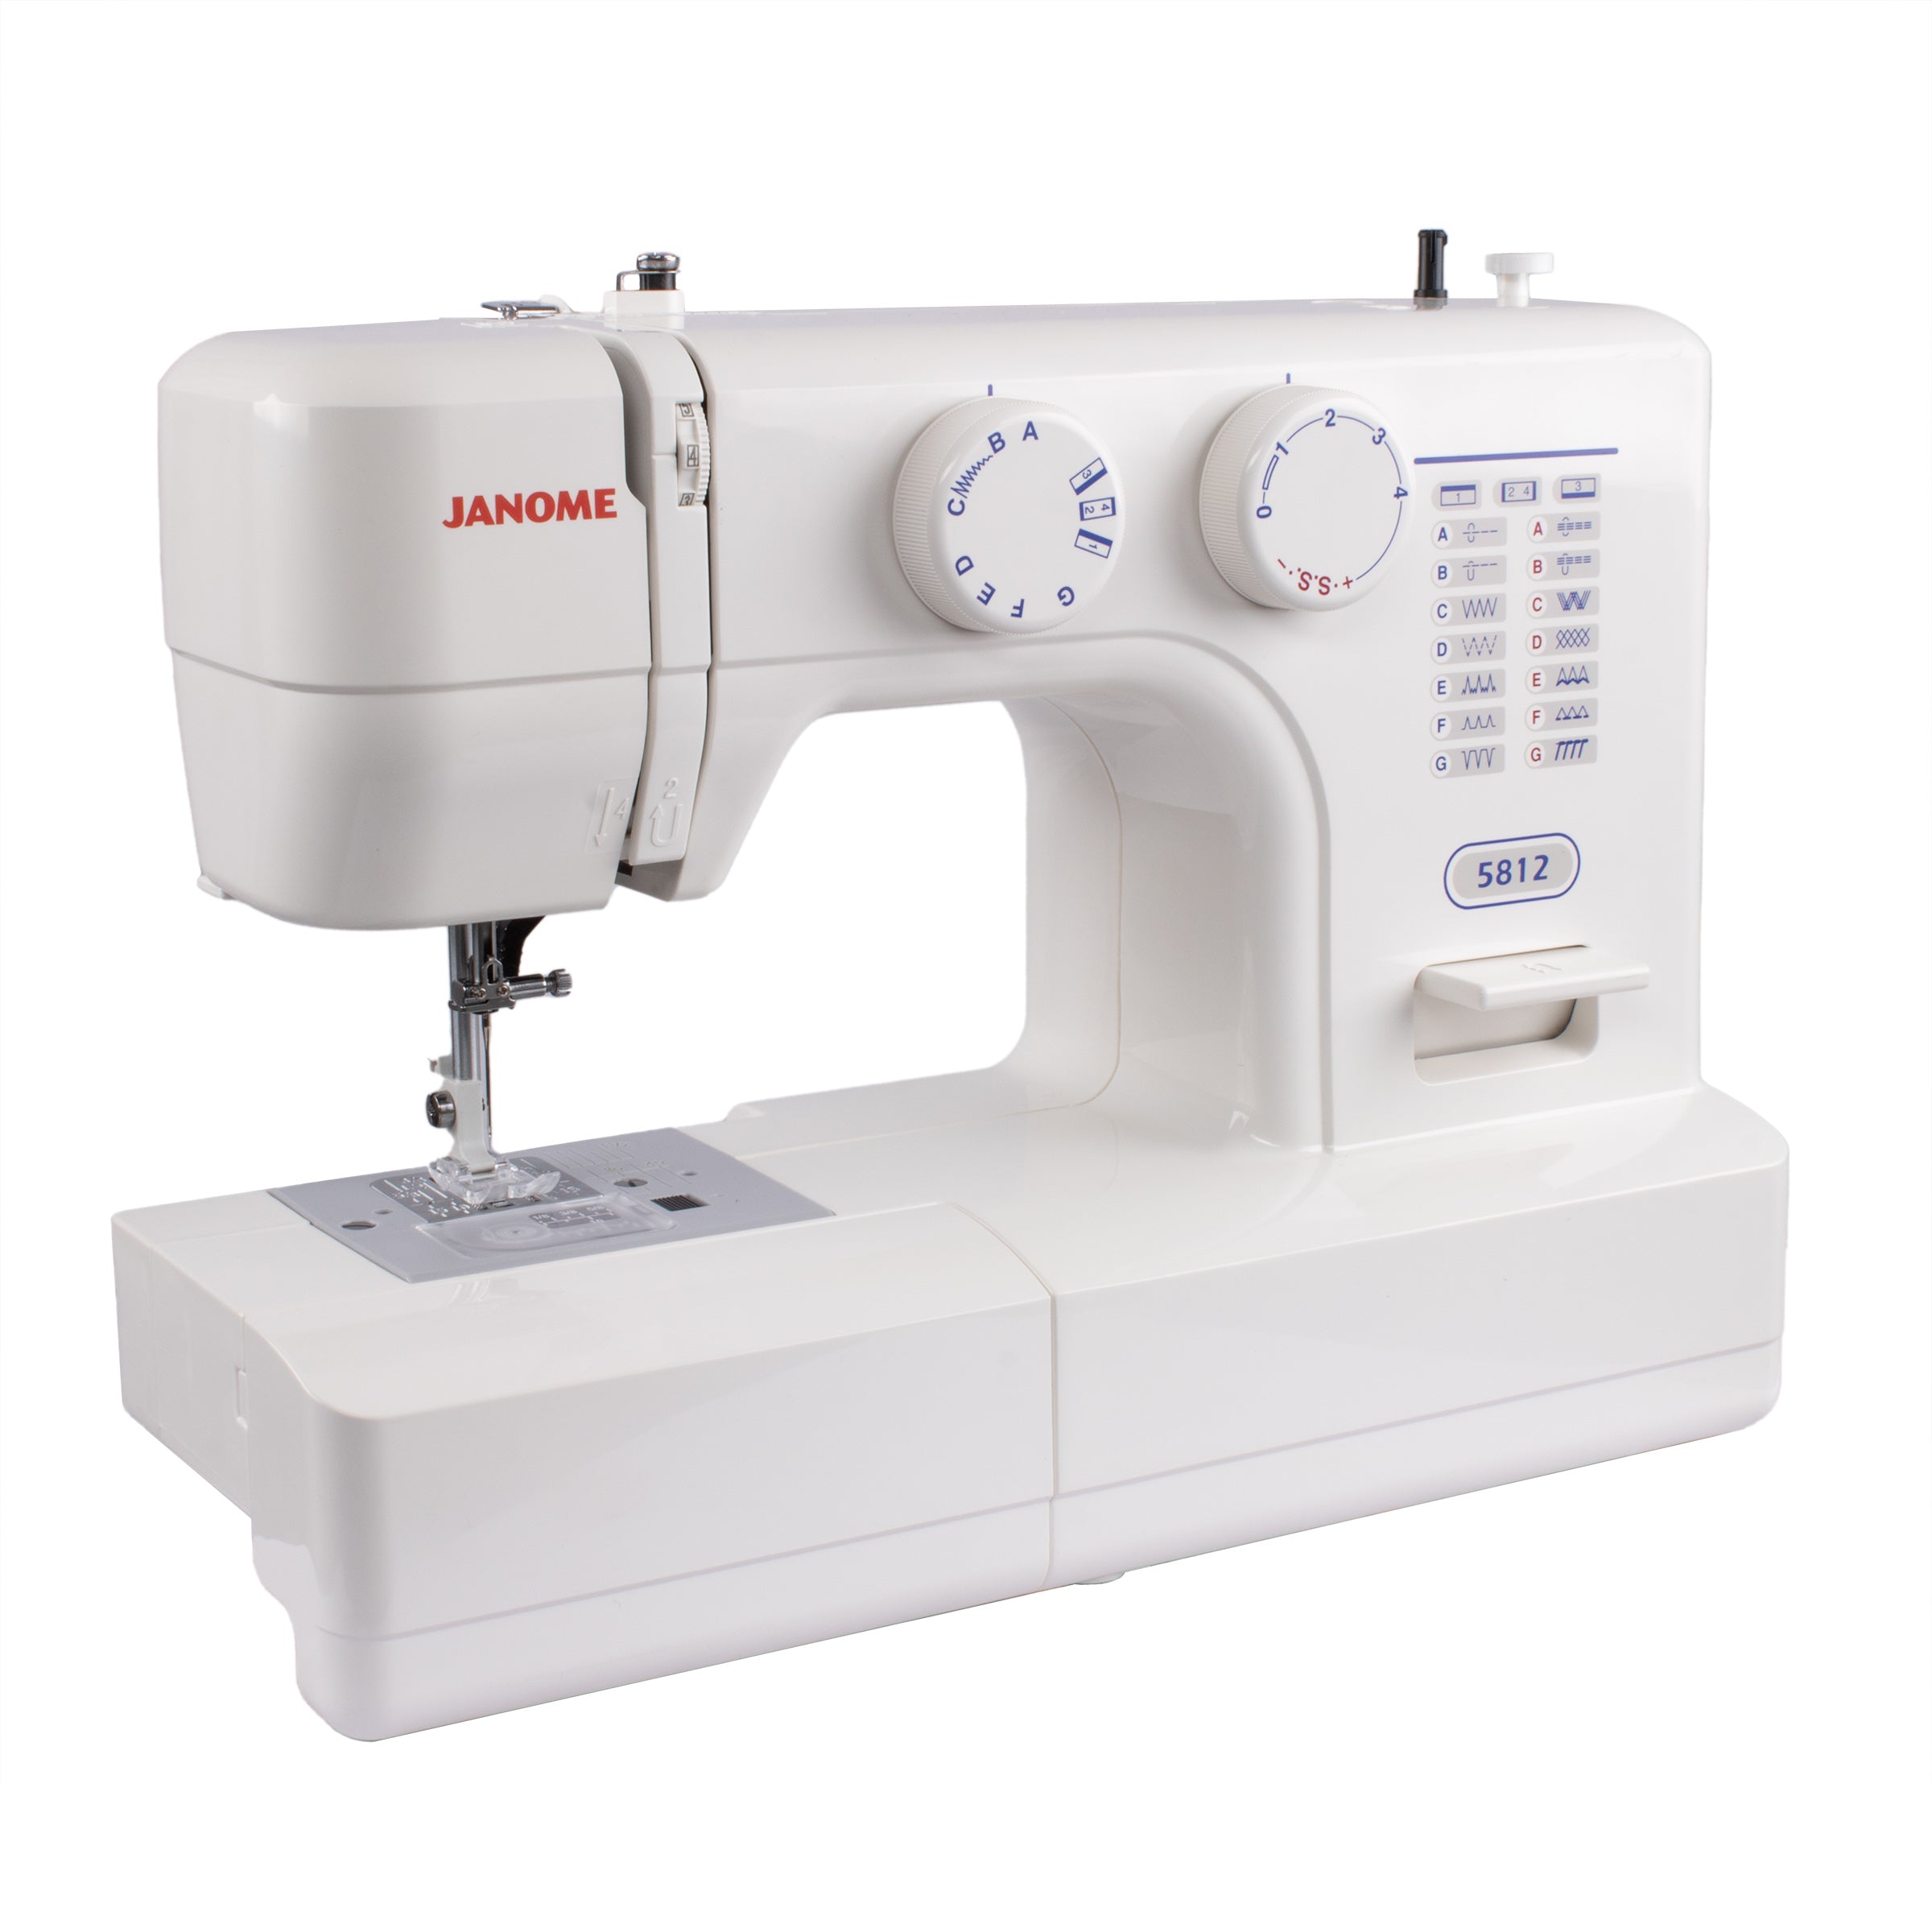 angled image of the Janome 5812 Sewing Machine